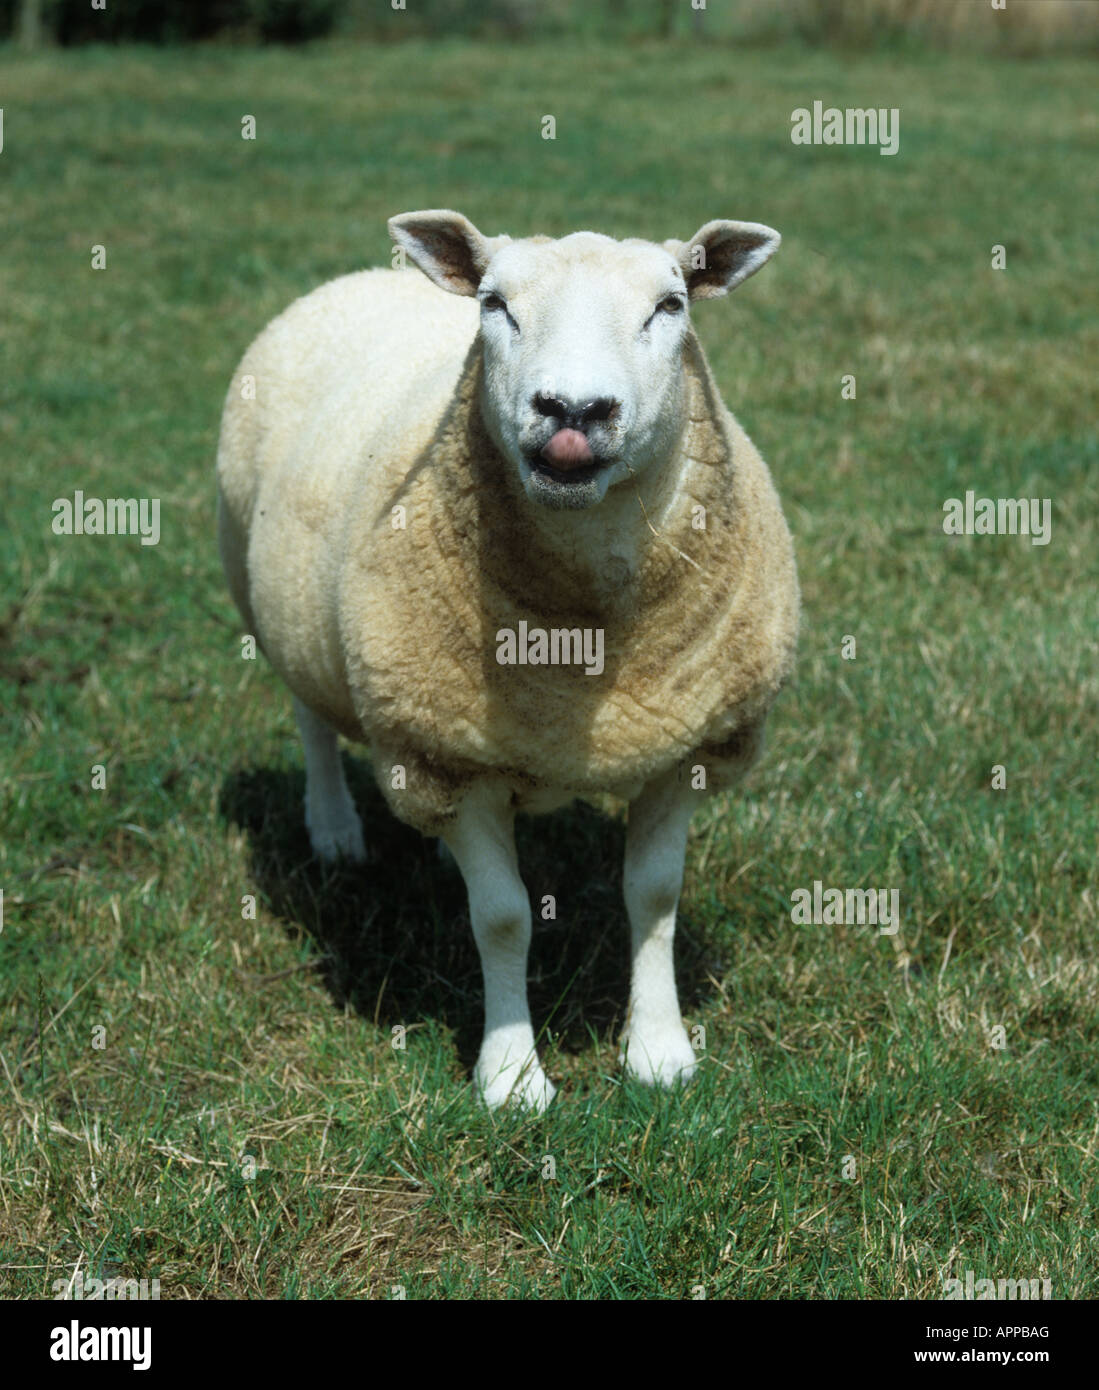 Excellent show texel ewe on grass facing camera with her tongue out Stock Photo